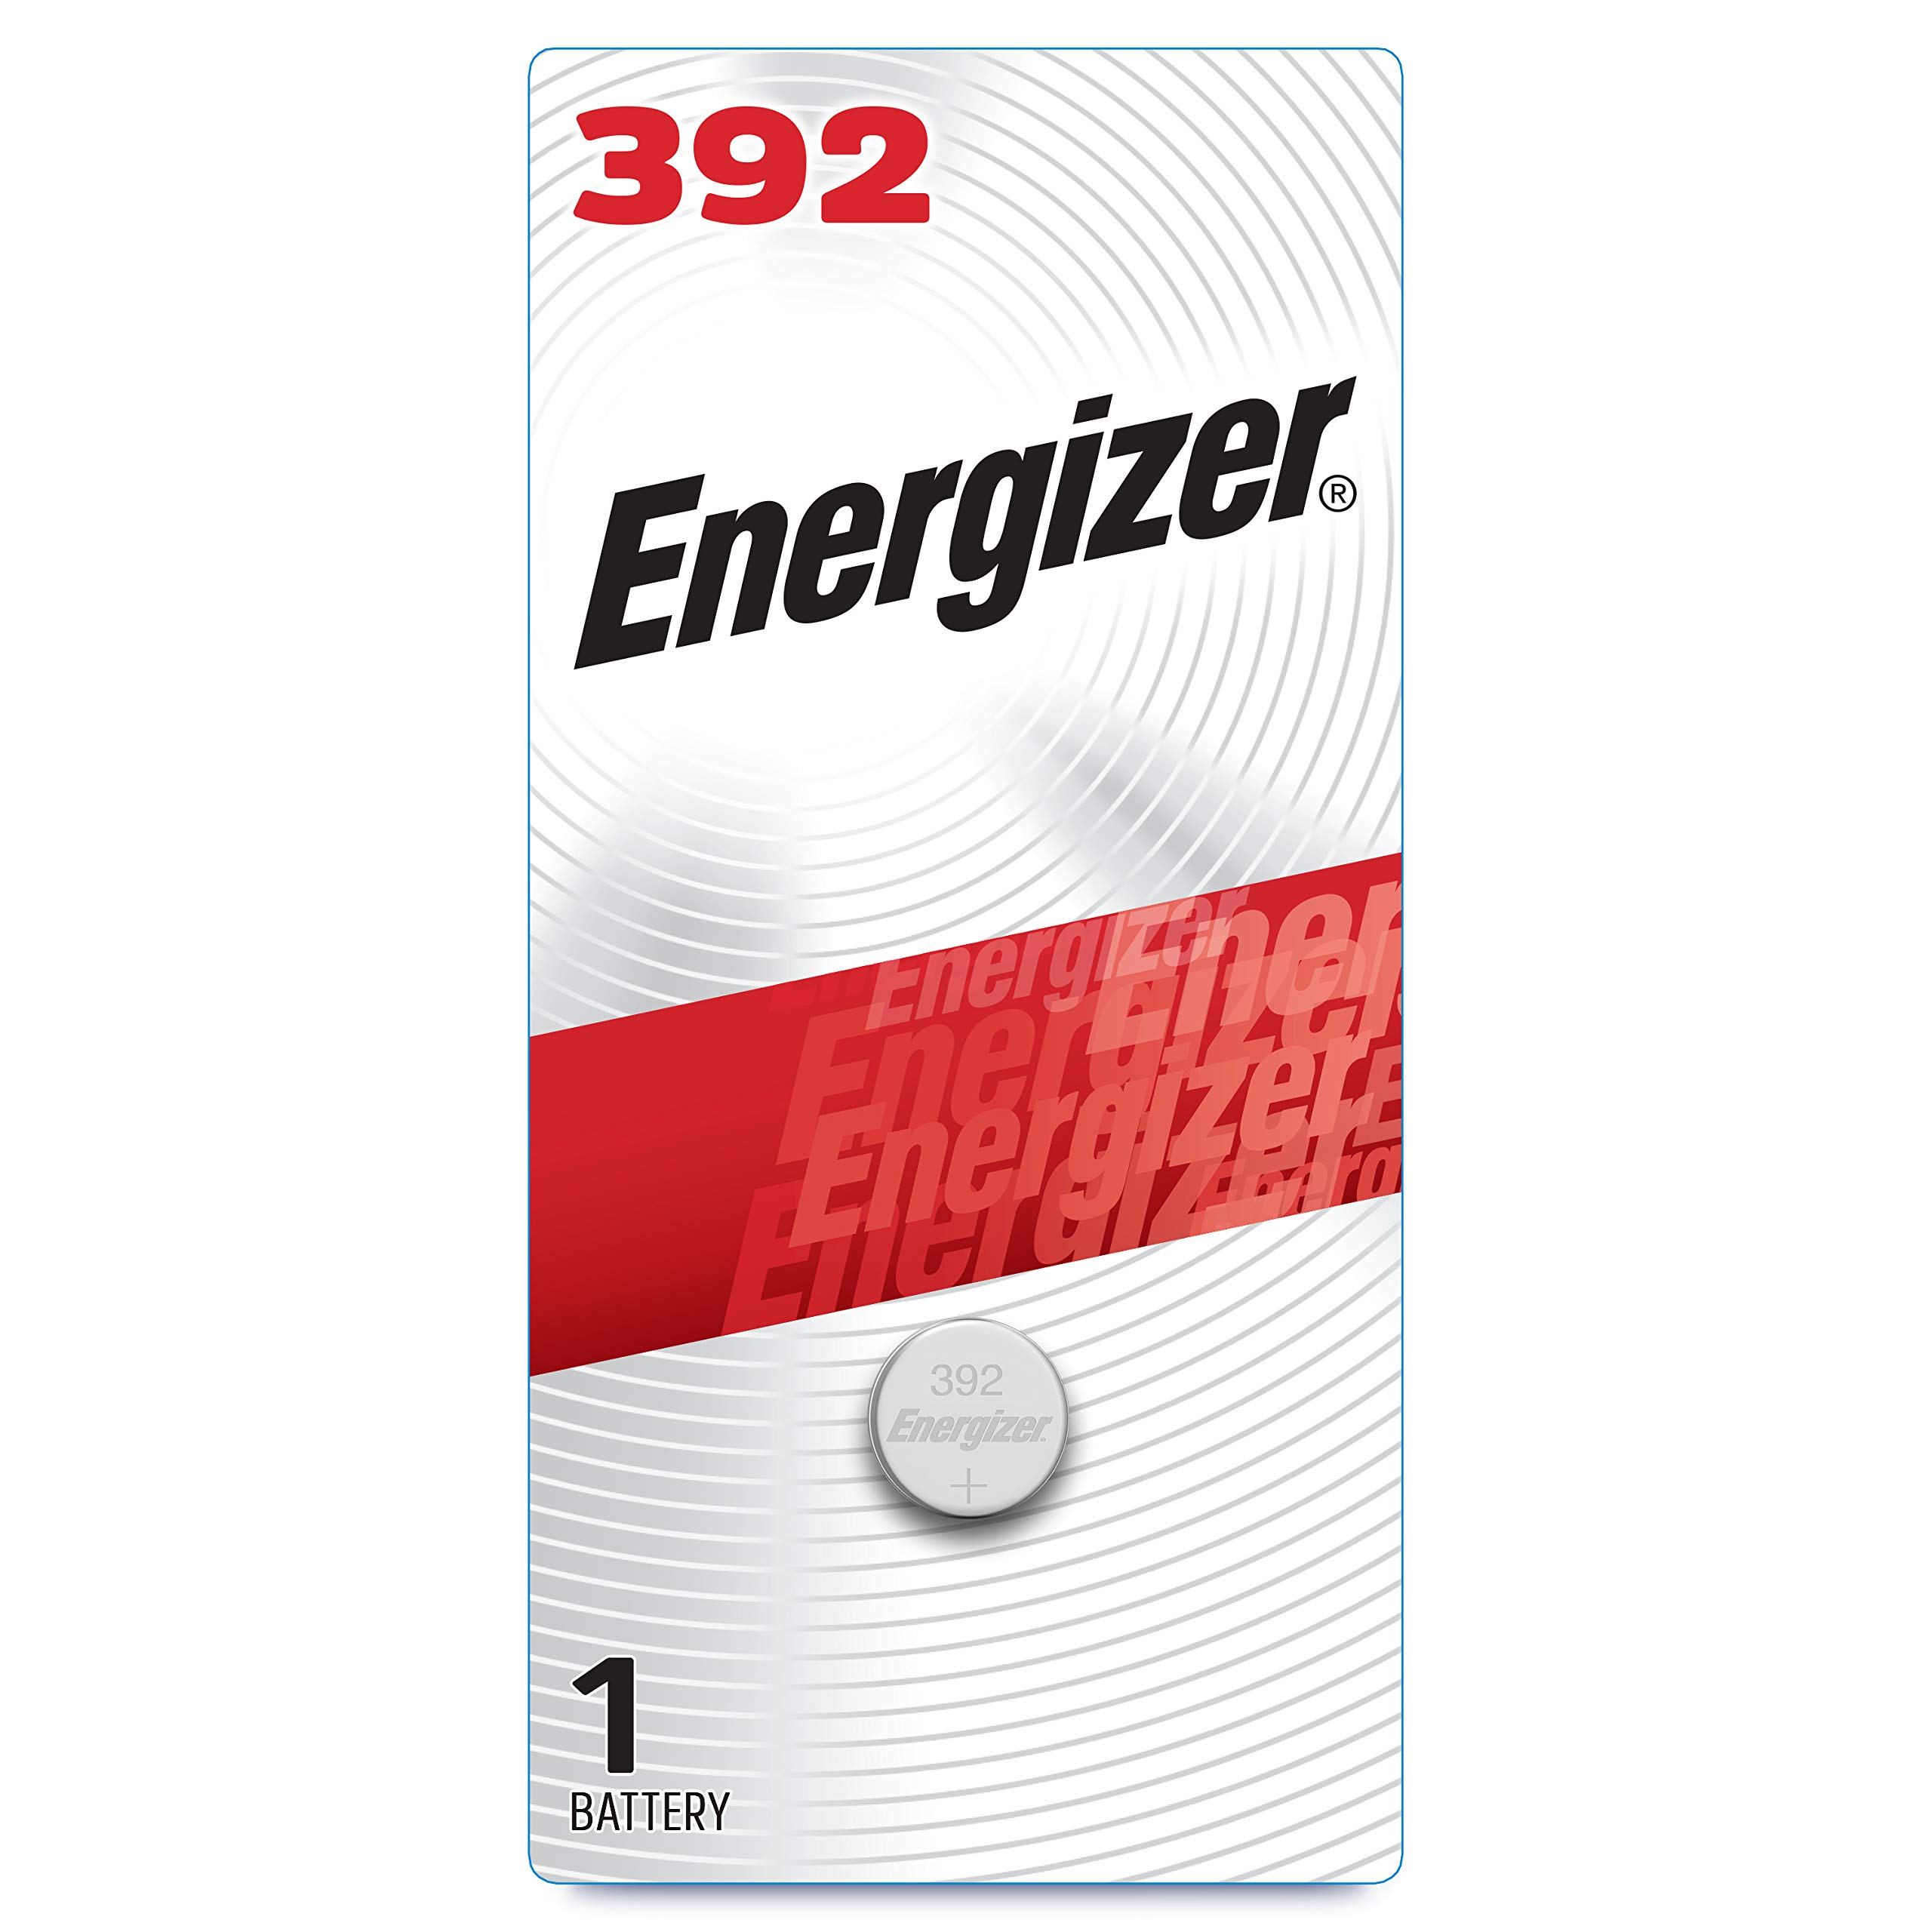 Energizer 392 Silver Oxide Batteries (1 Battery Count)